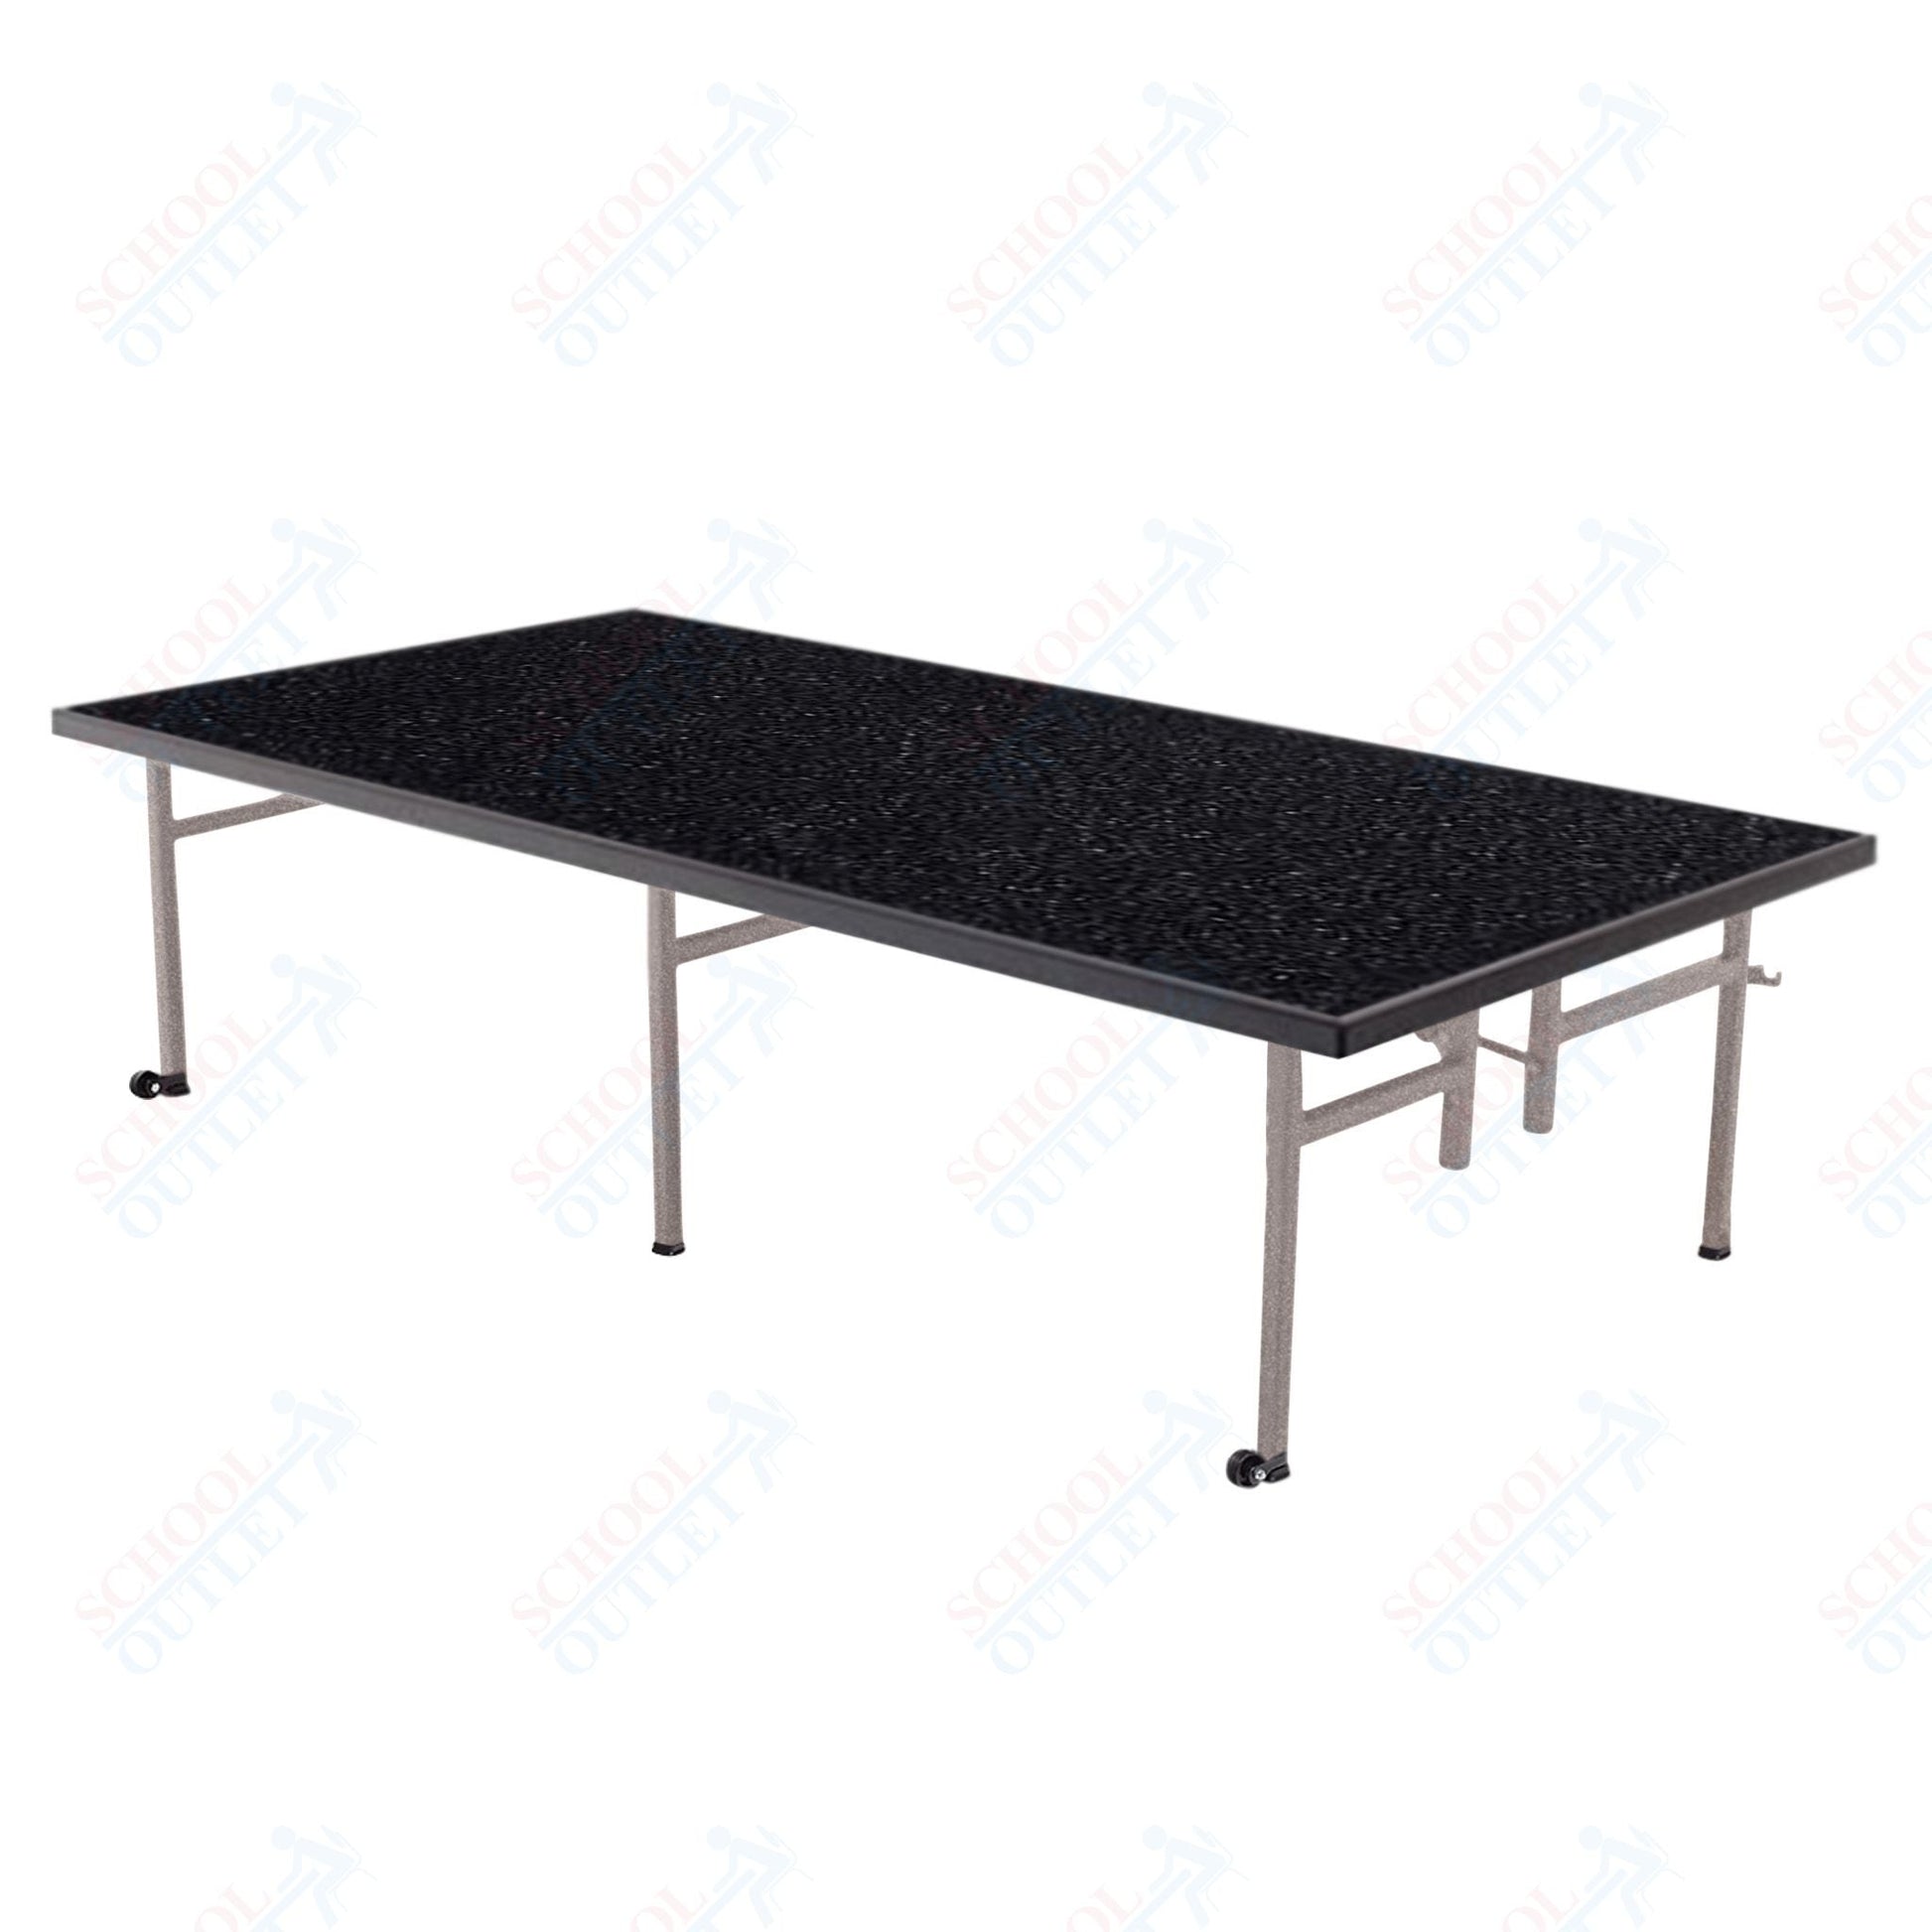 AmTab Fixed Height Stage - Carpet Top - 48"W x 72"L x 8"H (AmTab AMT - ST4608C) - SchoolOutlet